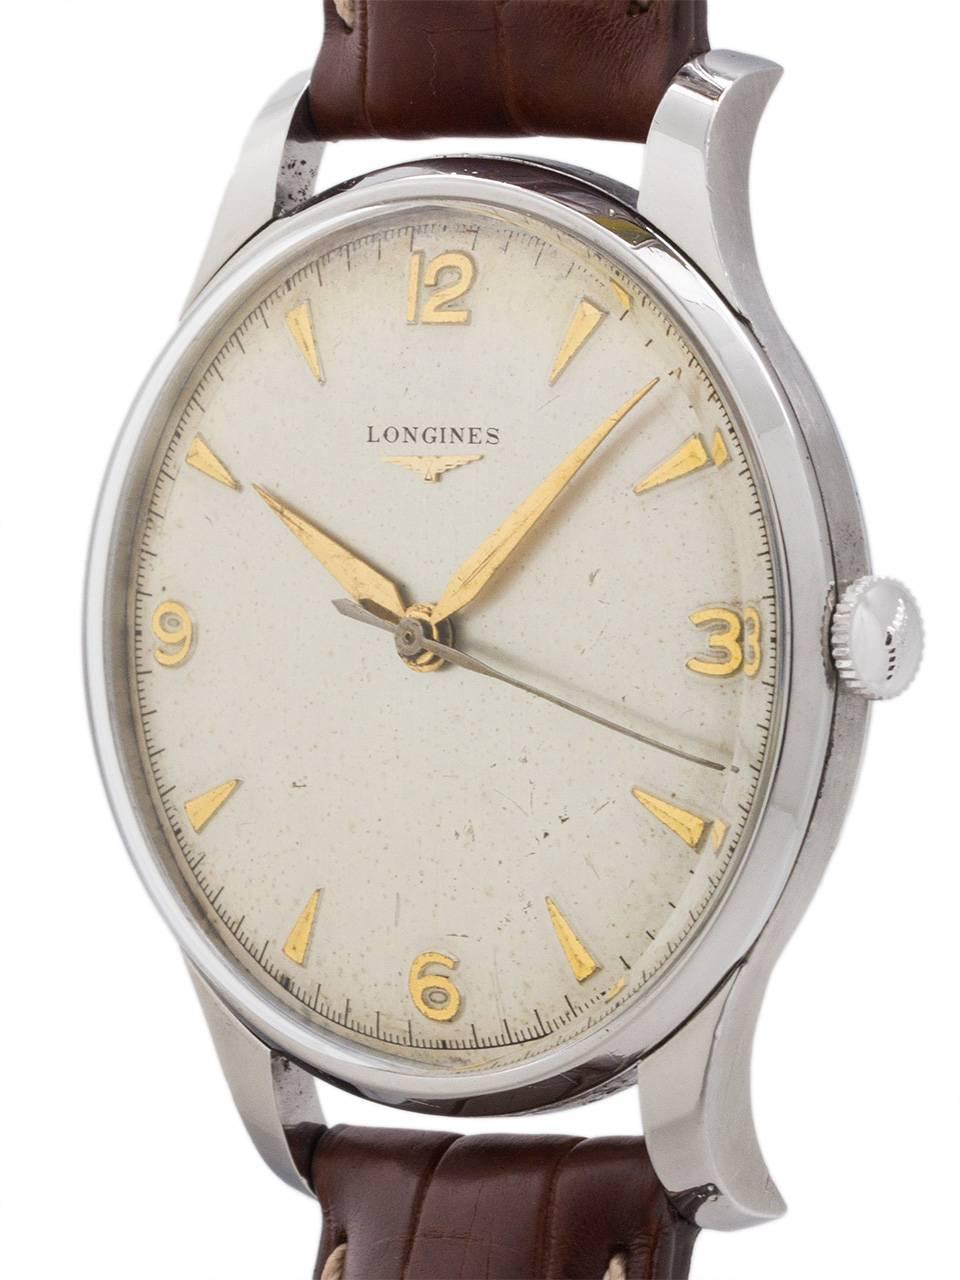 Vintage man’s Longines stainless steel oversize manual wind dress model circa 1956. Featuring large for the era 37 x 46mm heavy snap back case with extended lugs, acrylic crystal, matte silvered dial with raised gold tapered indexes and tapered gilt